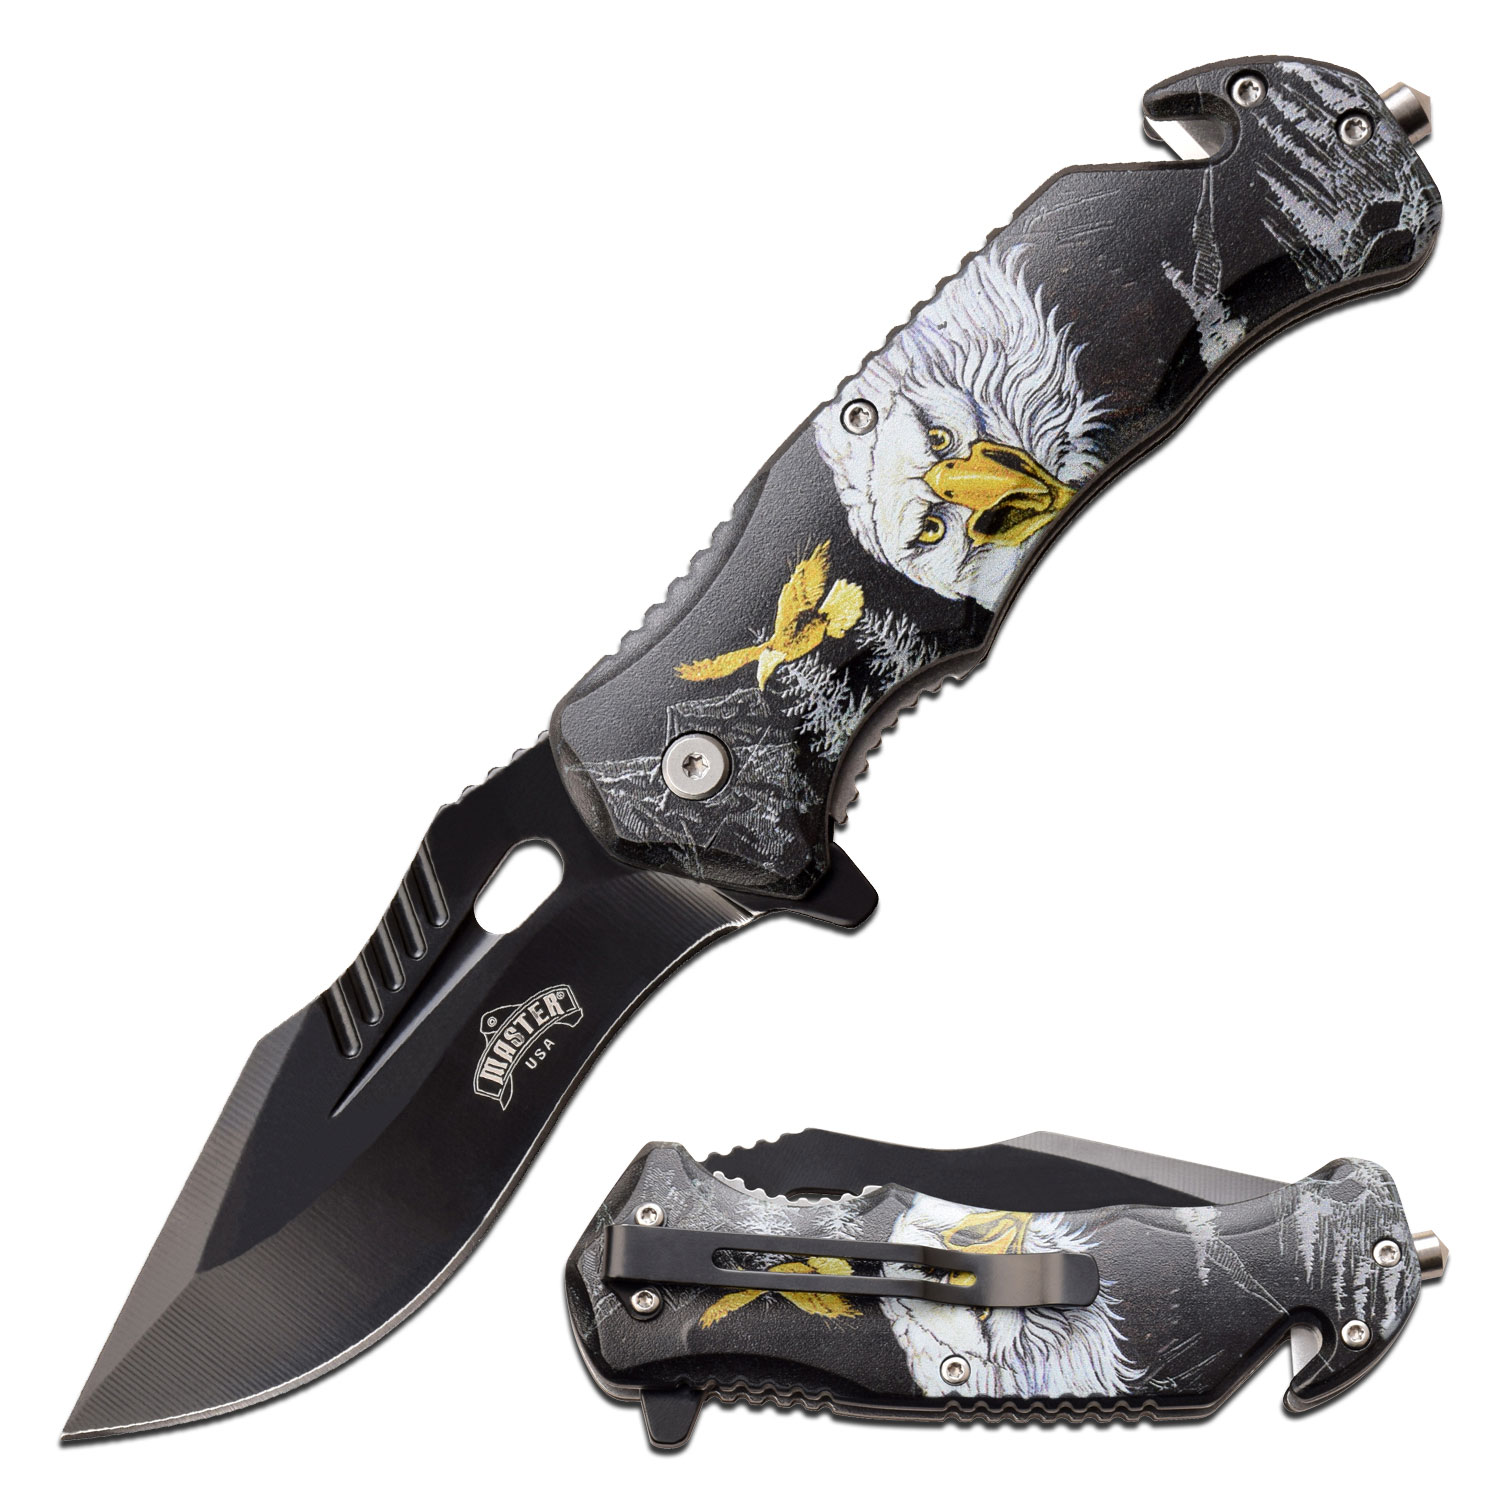 Spring-Assist Folding Knife 3.75In Black Blade Tactical EDC Rescue Eagle